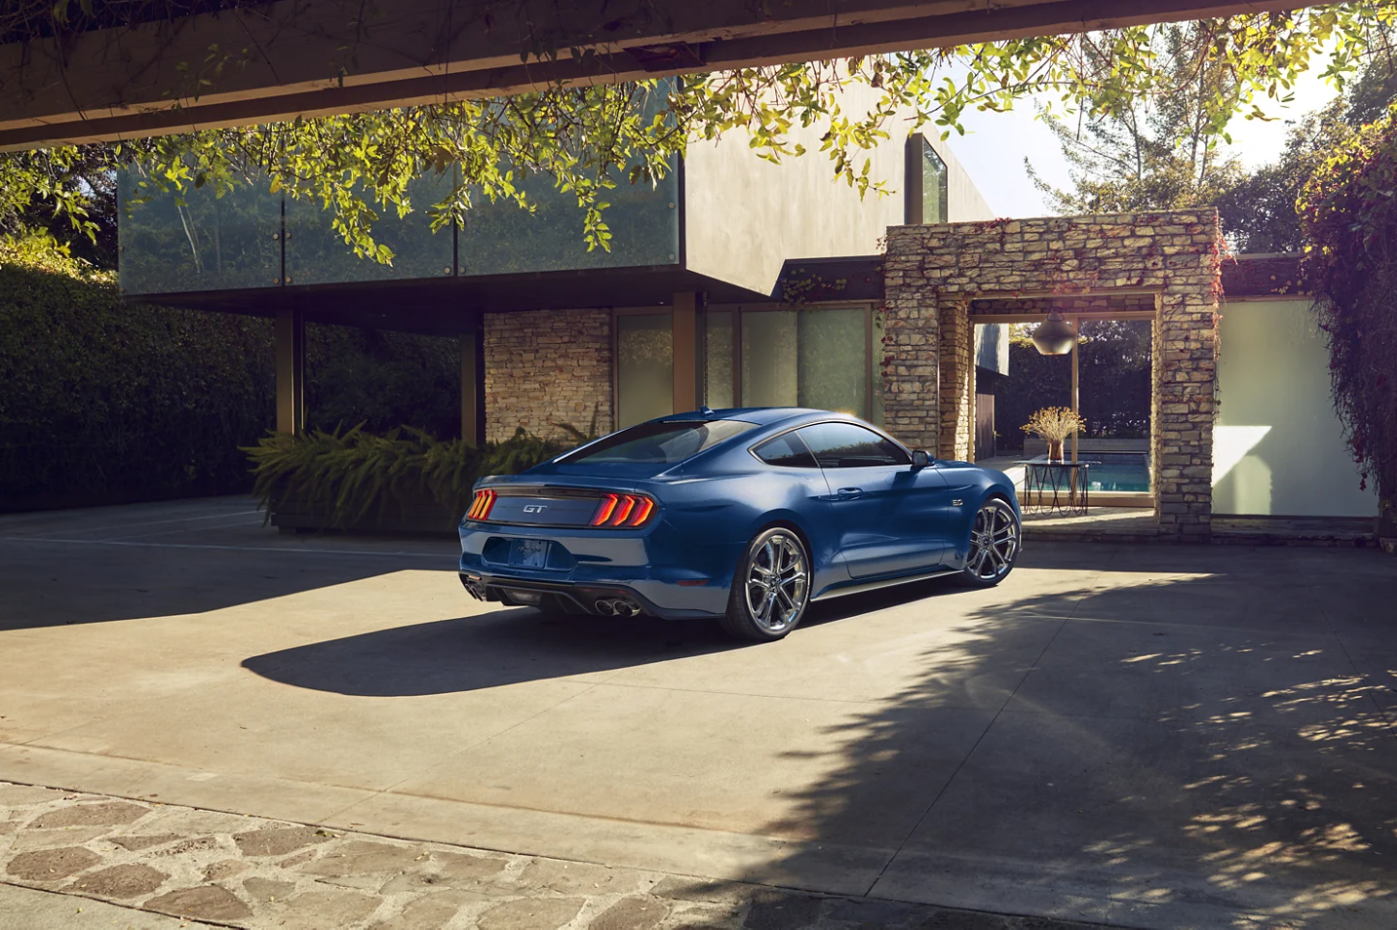 A blue 2022 Ford Mustang sits parked with its nose facing away from the viewer in the driveway of a Midcentury Modern home.